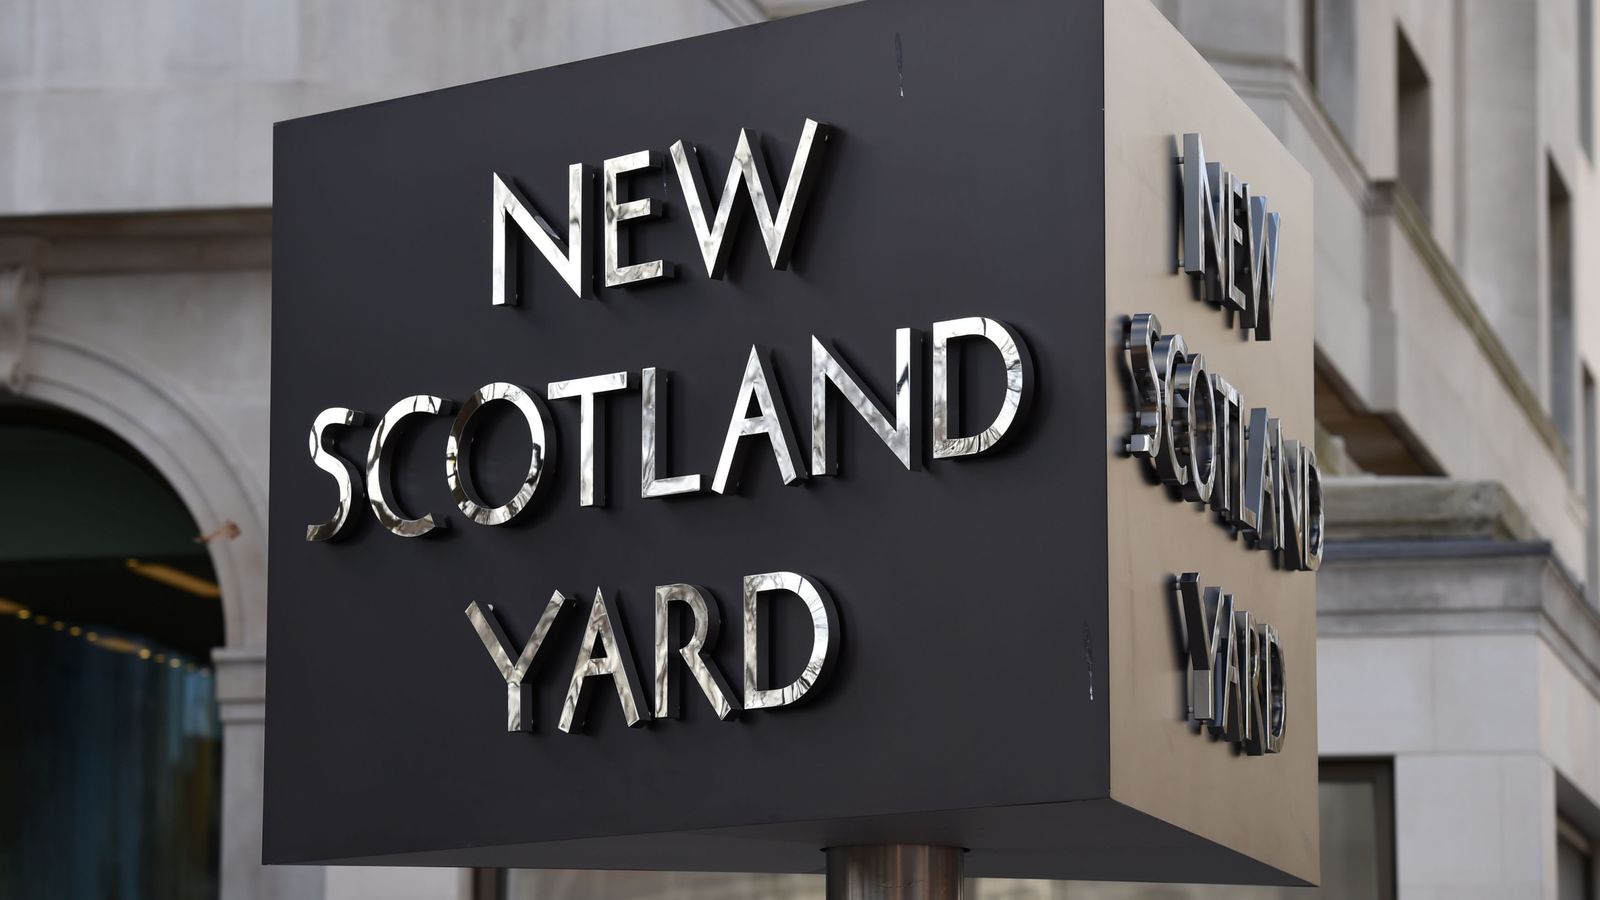 Former Metropolitan Police officer accused of rape threatened to stab woman, court told